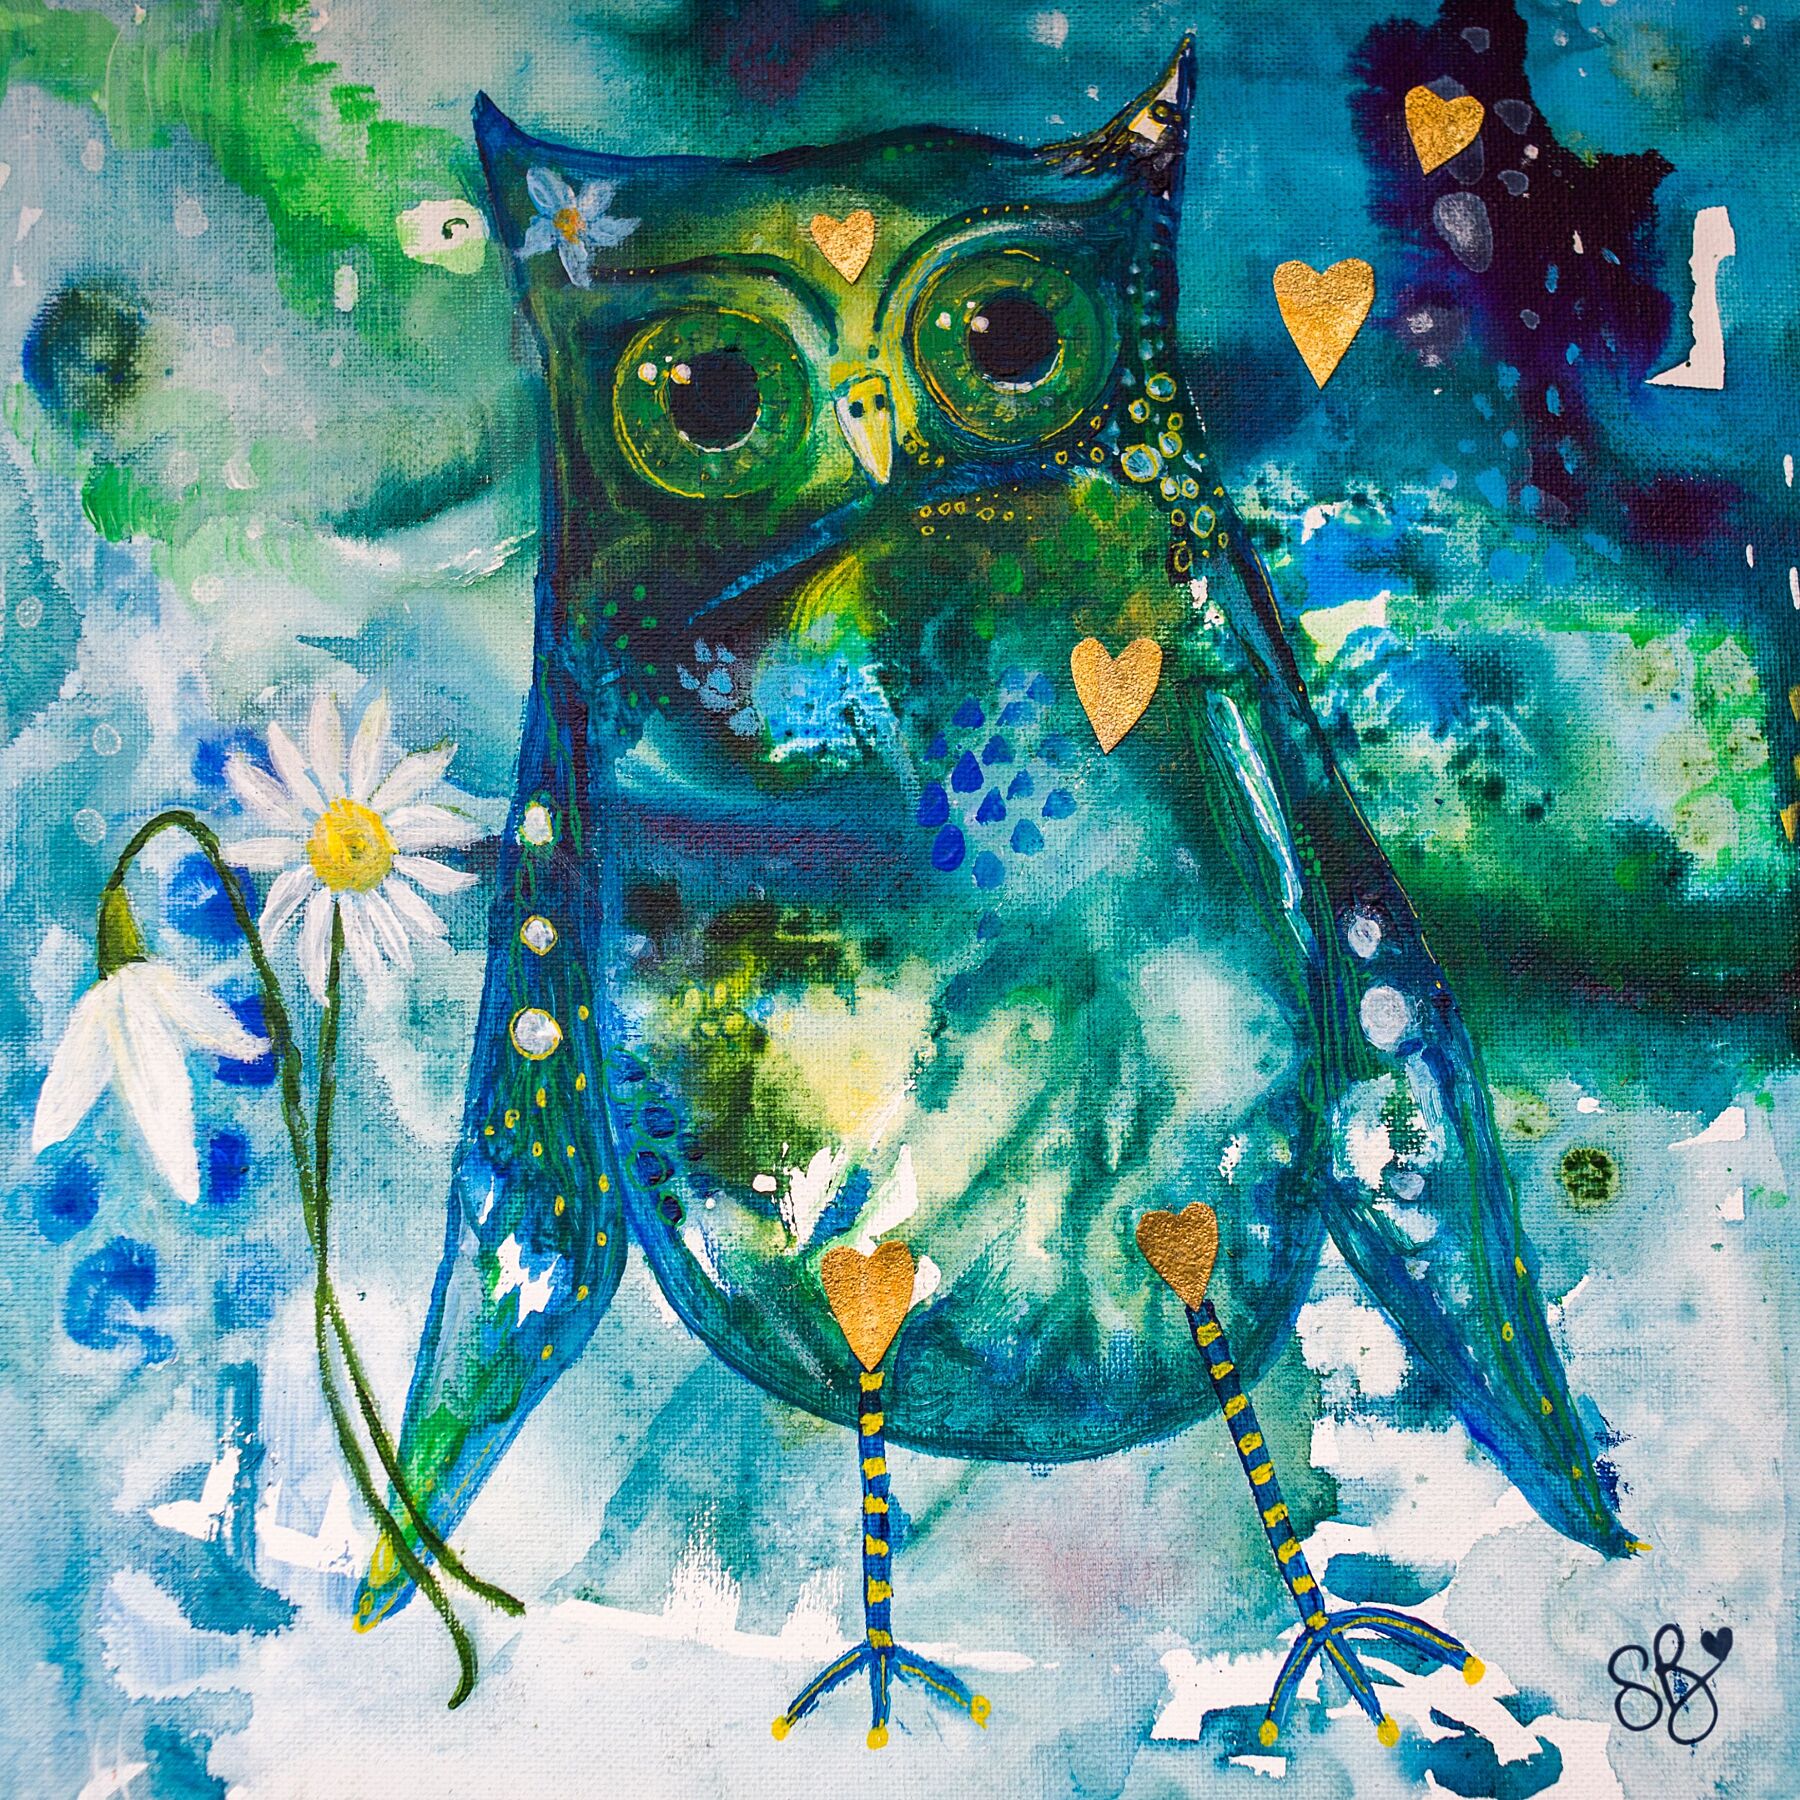 Owl art print - Water Spirit Owl is a whimsical owl painted in watery blues and greens. She holds a snowdrop and daisy in her wing and a forget me not flower is on her ear.